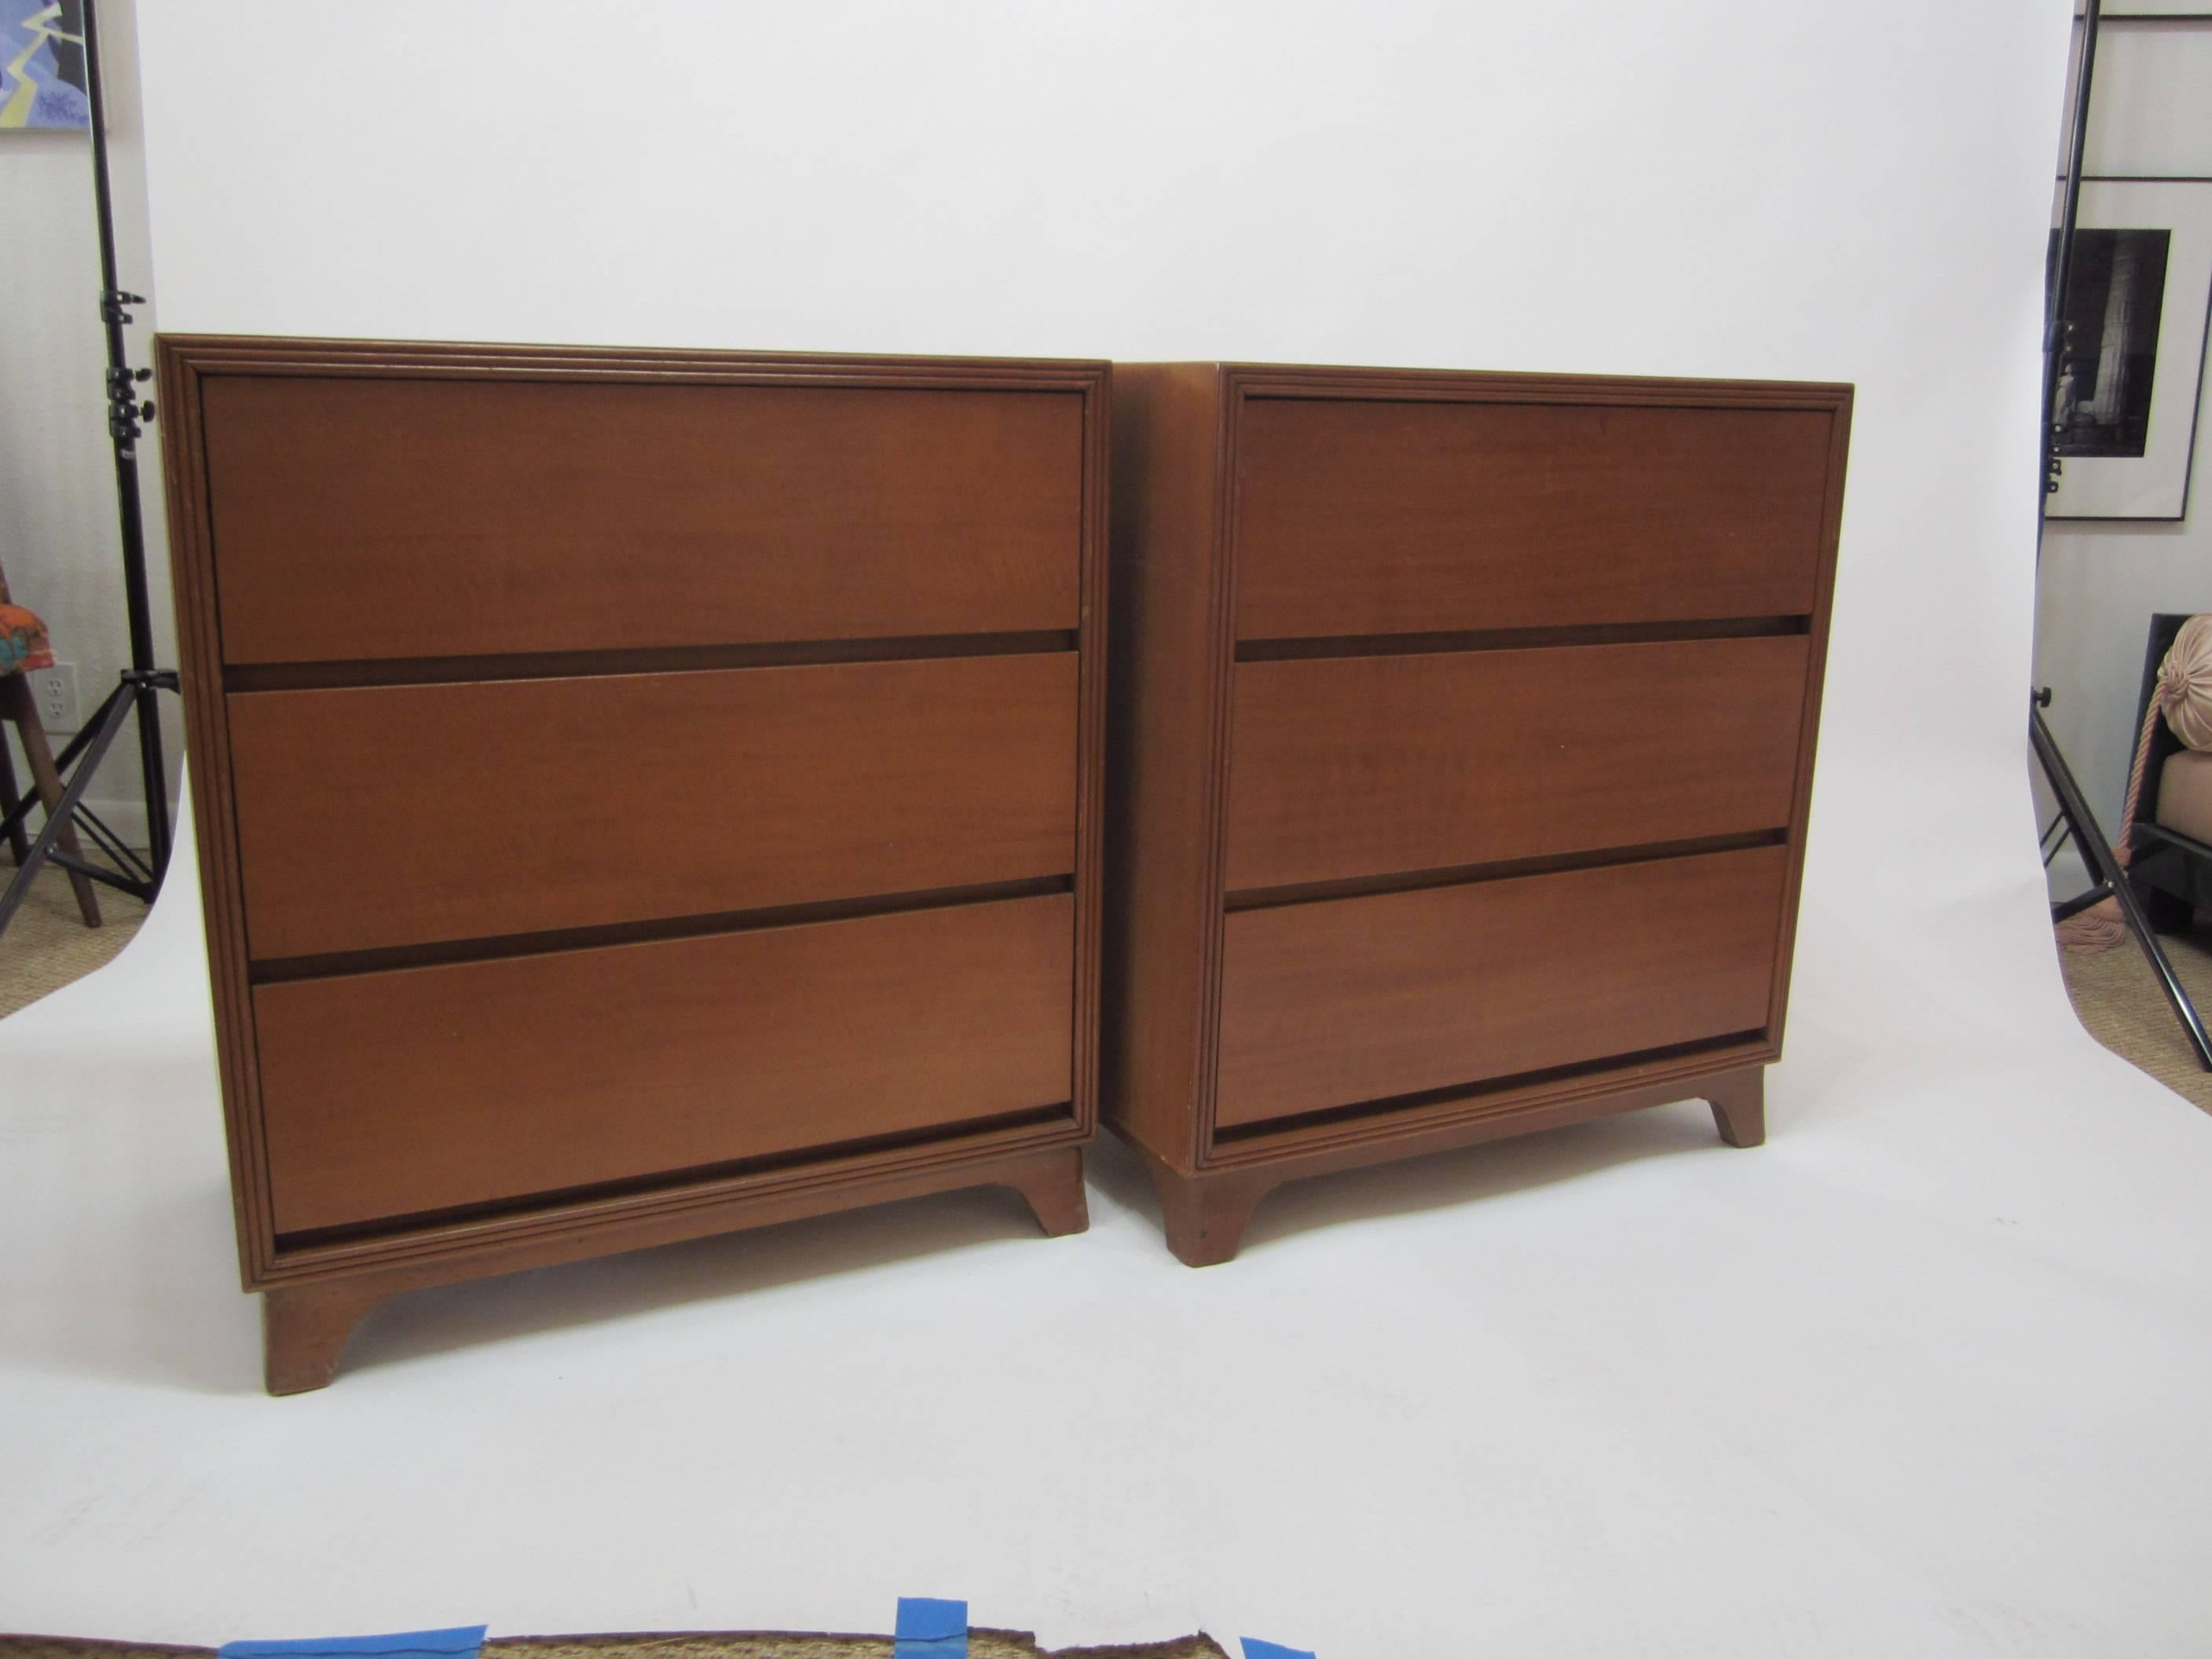 Wonderful pair of flared leg chests of drawers or bachelors chests each with three drawers. Clean lines with ribbed molding surrounding exterior front. Drawers open by pulling from bottom keeping the lines very clean with no pulls. Original